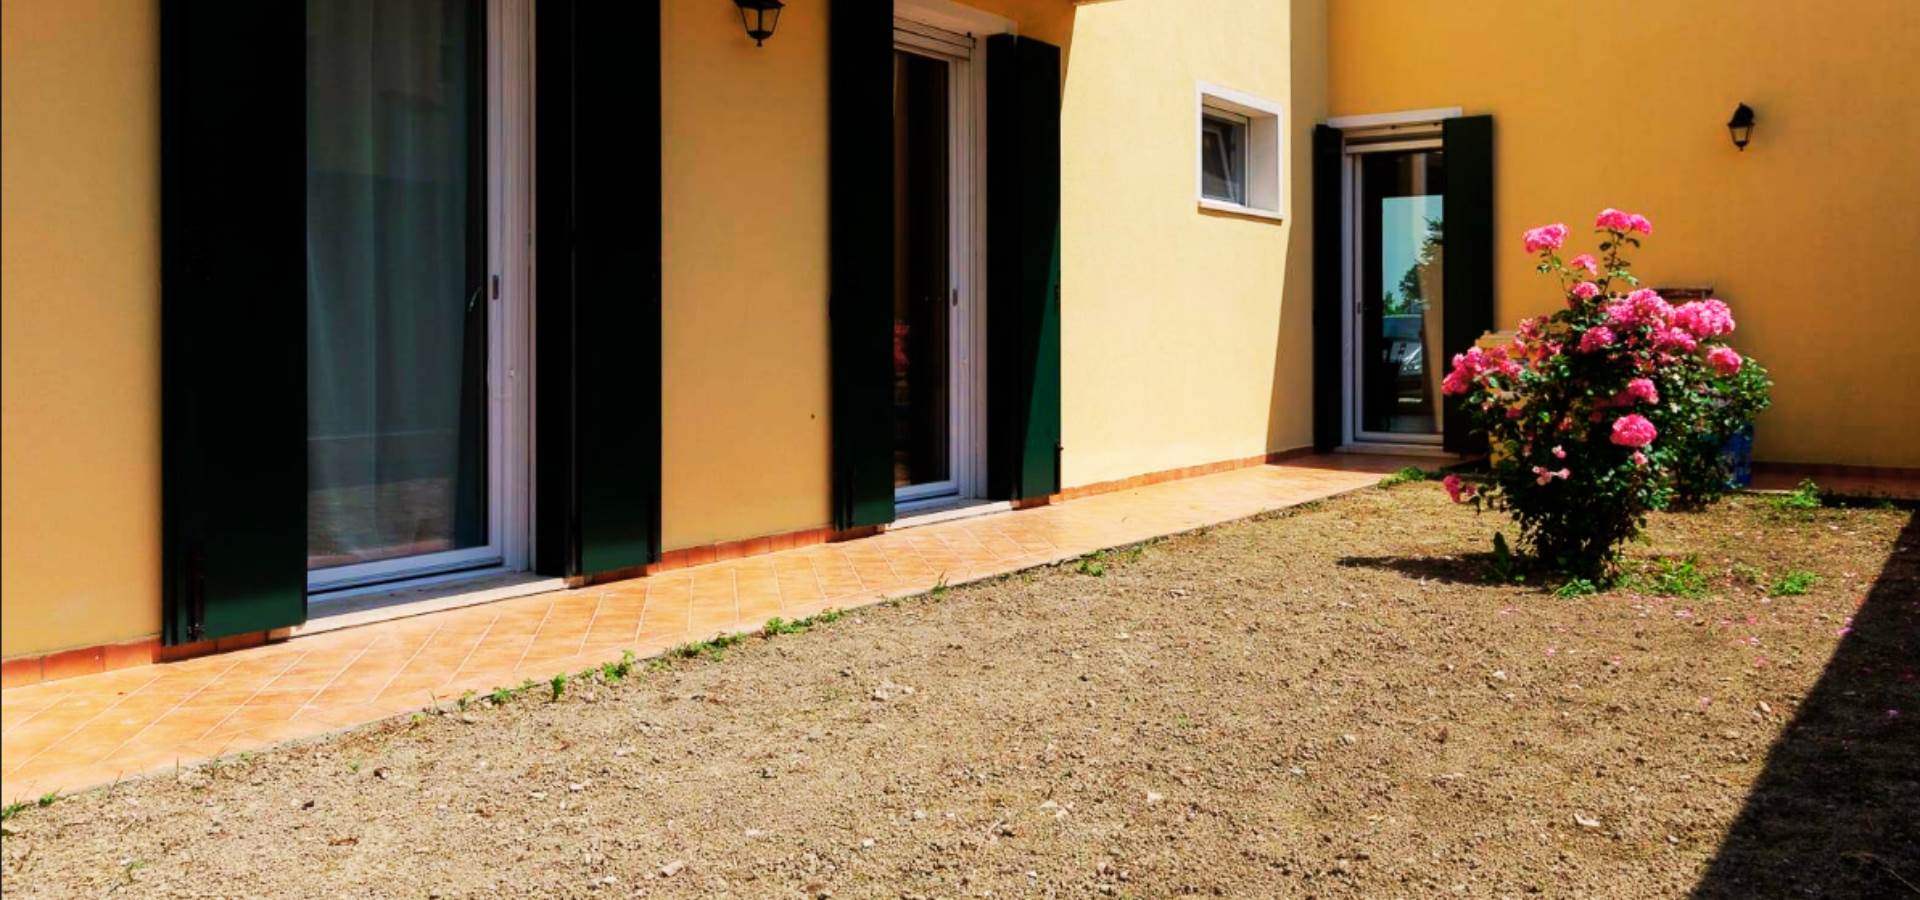 TEGLIO VENETO, Apartment for sale of 74 Sq. mt., Excellent Condition, Heating Individual heating system, Energetic class: C, placed at Ground, 